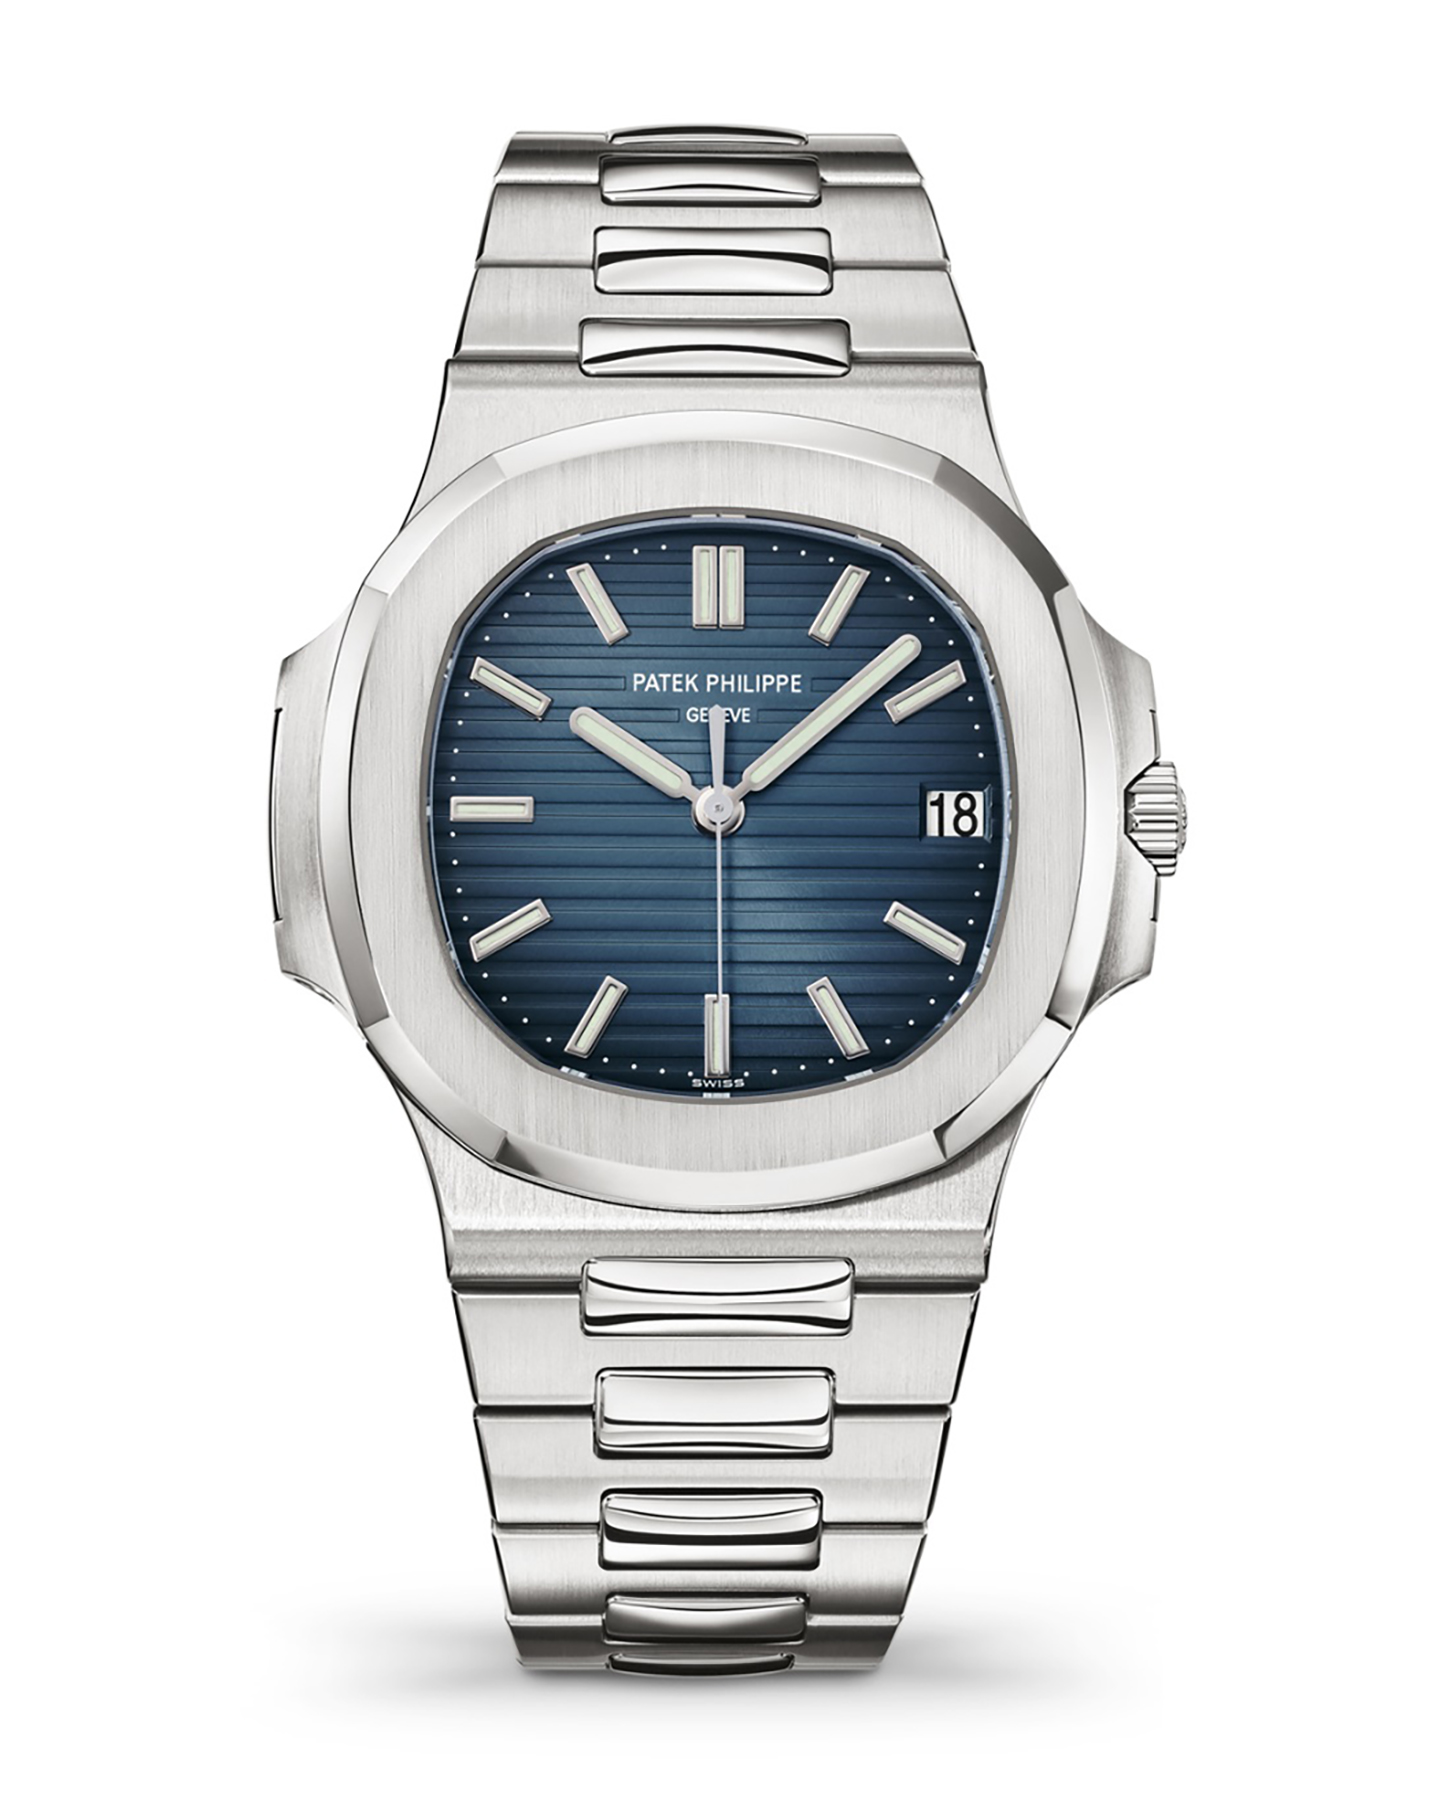 Unmatched Precision and Innovation: Patek Philippe's Commitment to Excellence